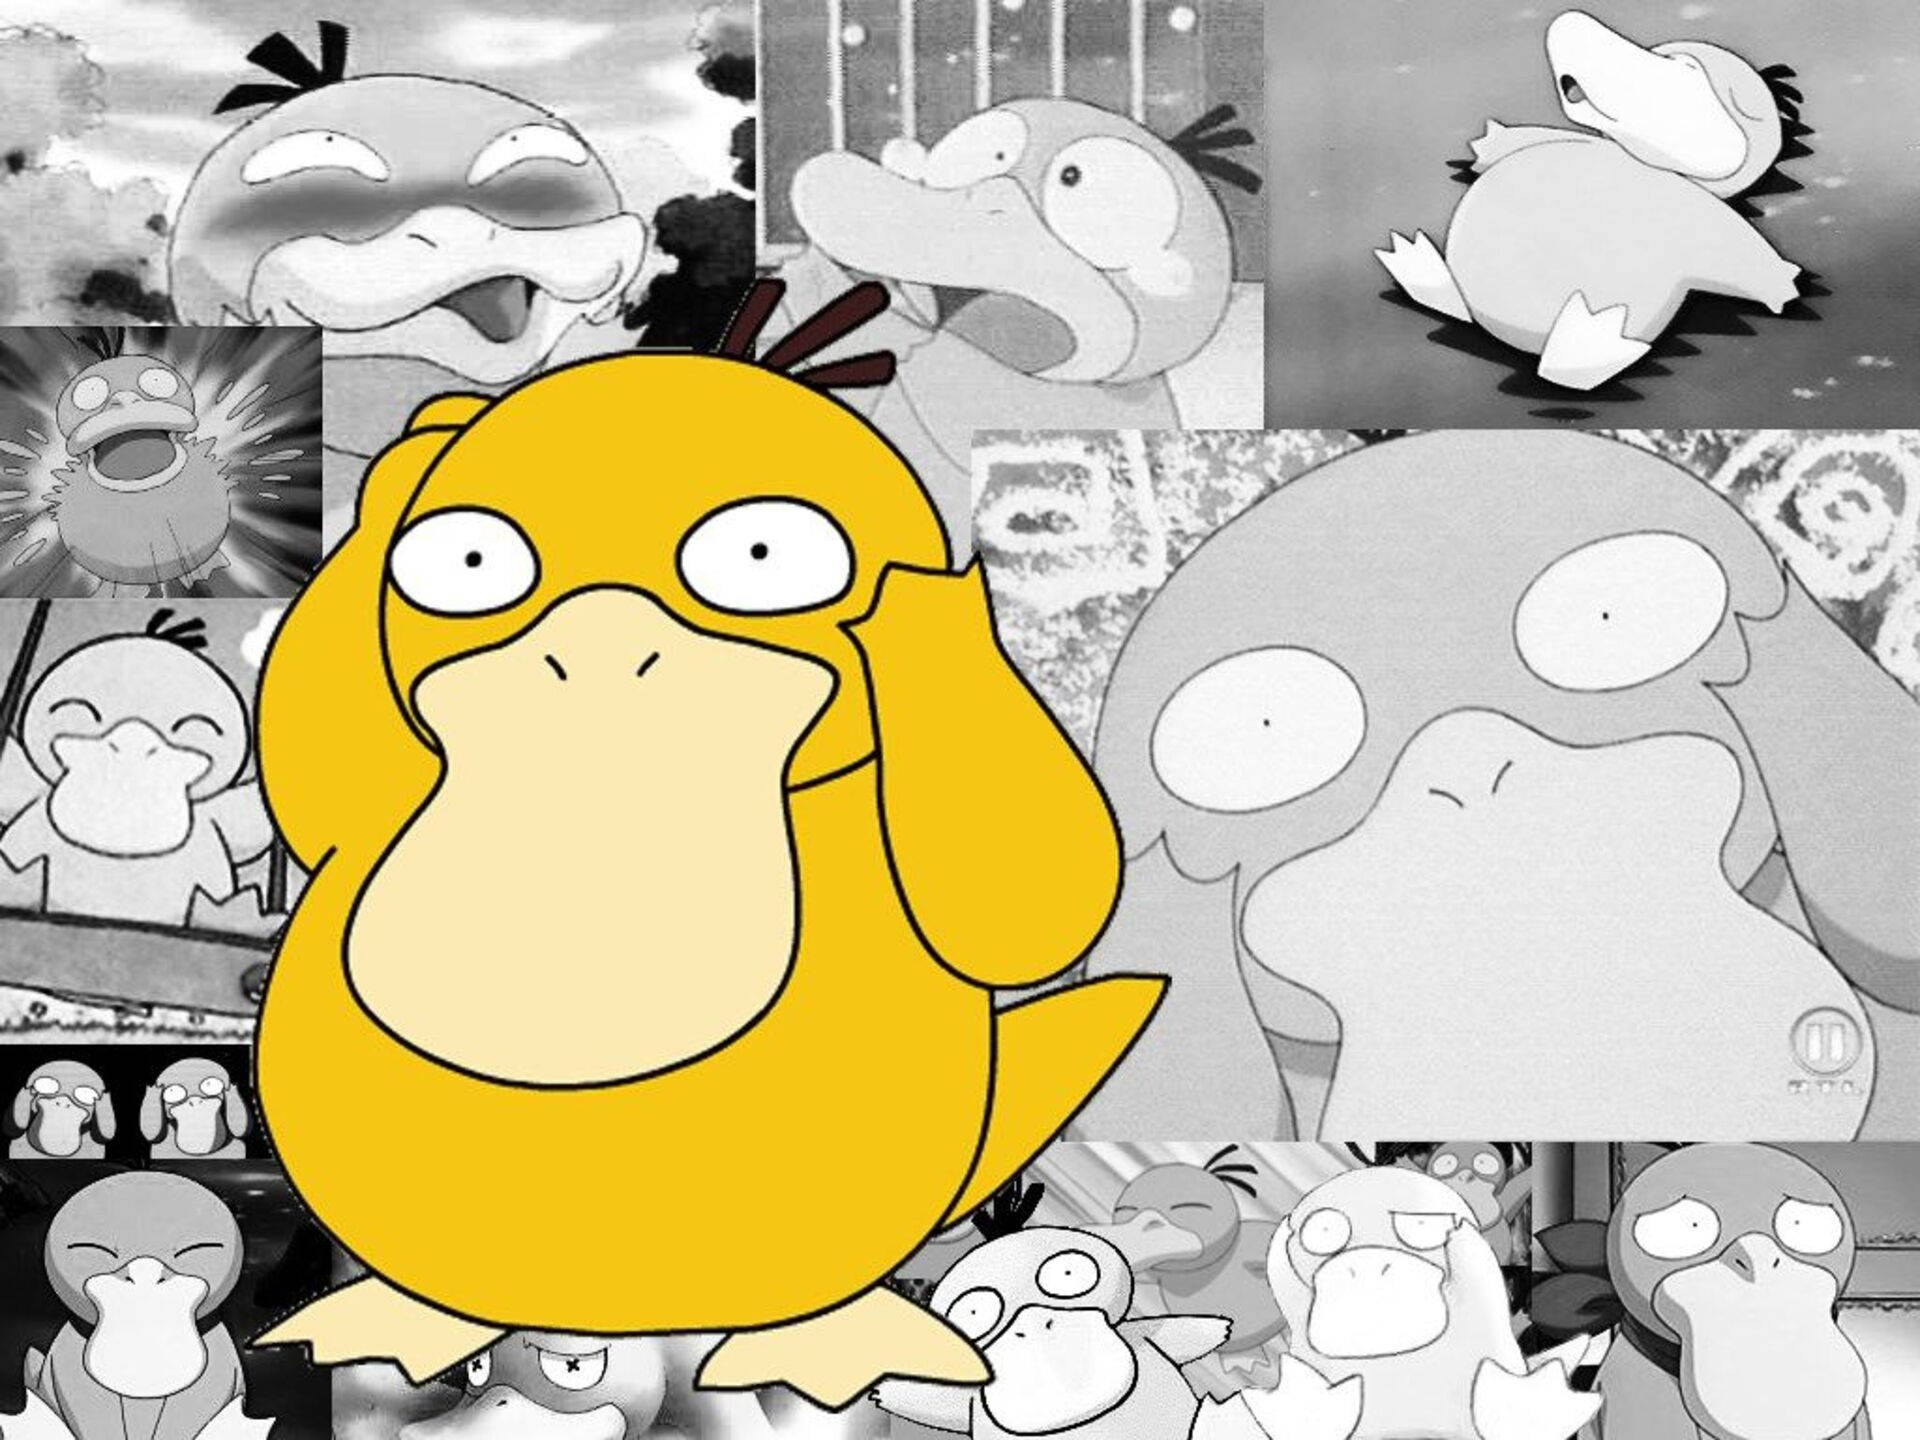 Everyone Loves That Funny Little Psyduck Background